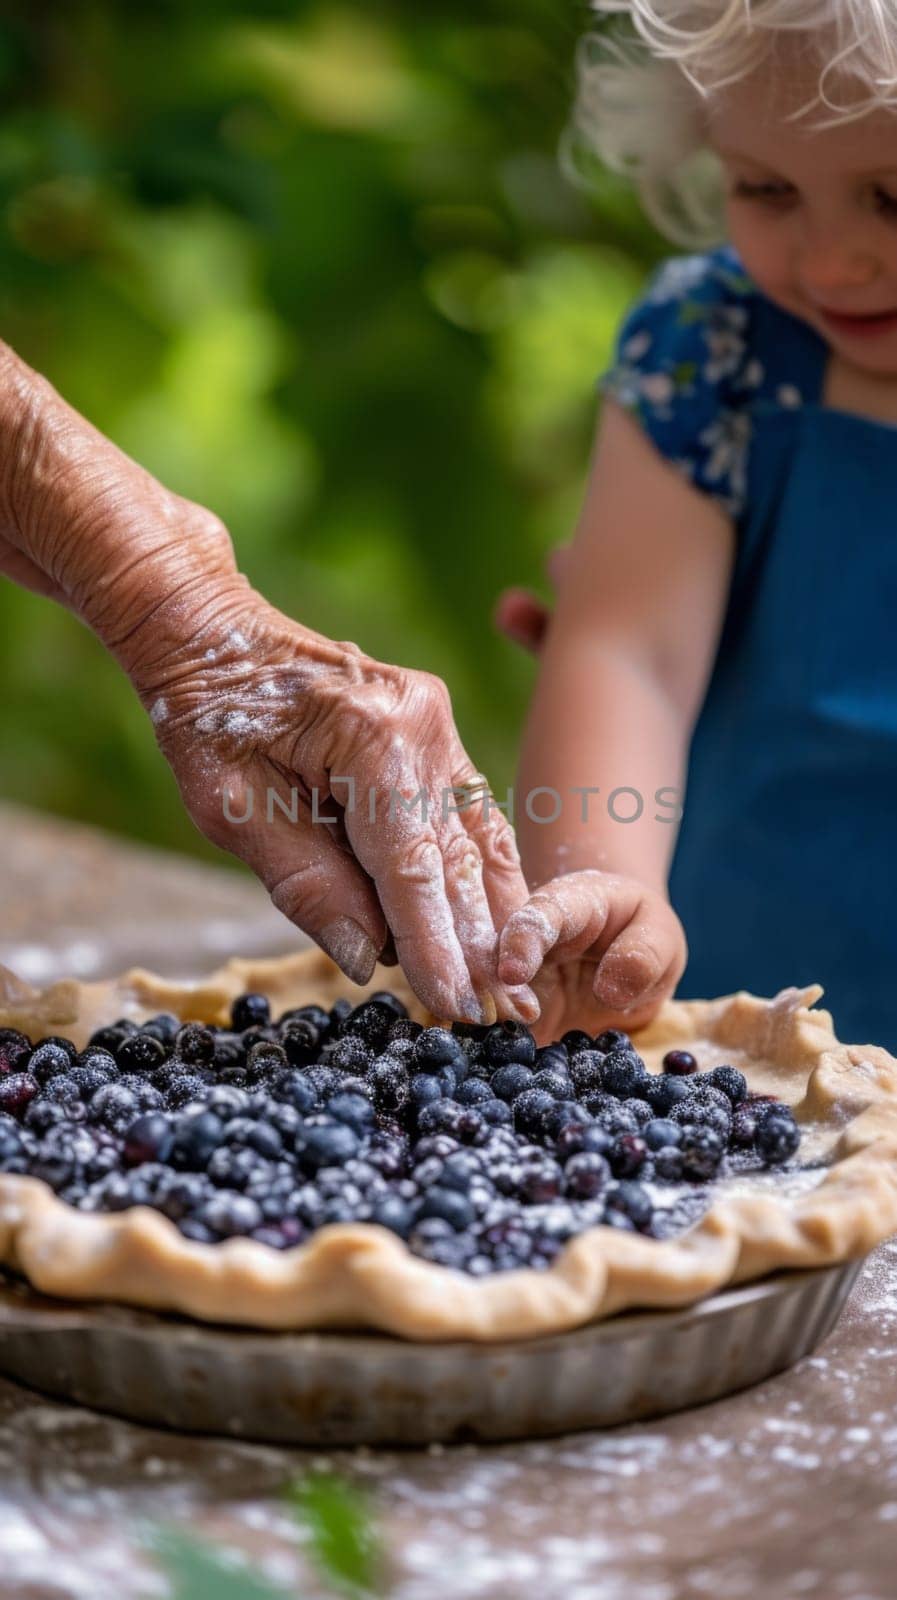 A person is touching a blueberry pie with their hands